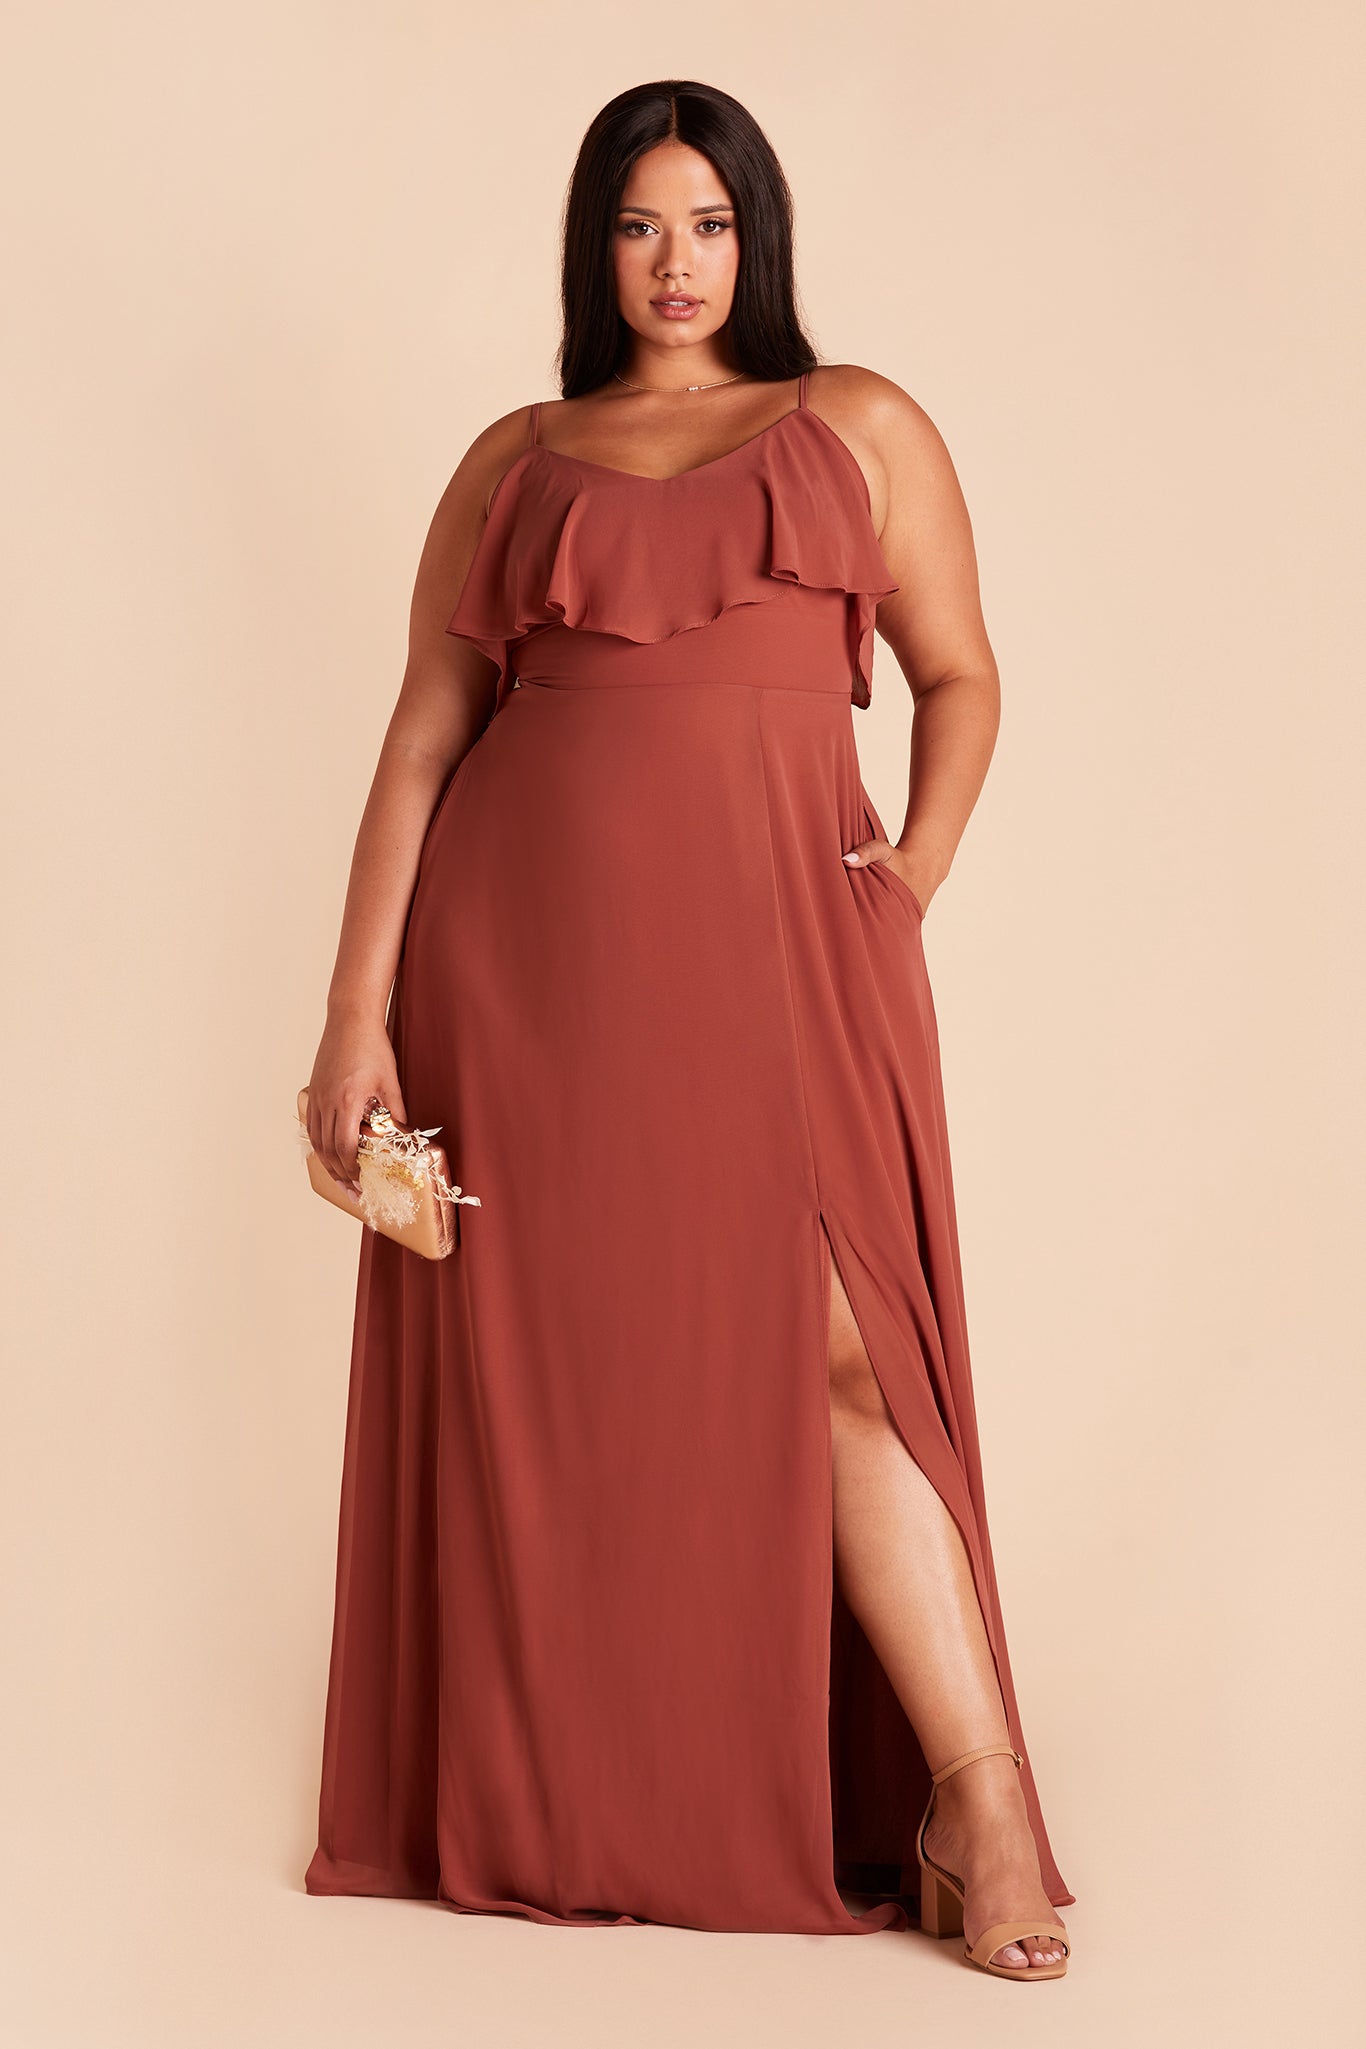 Jane convertible plus size bridesmaid dress with slit in spice chiffon by Birdy Grey, front view